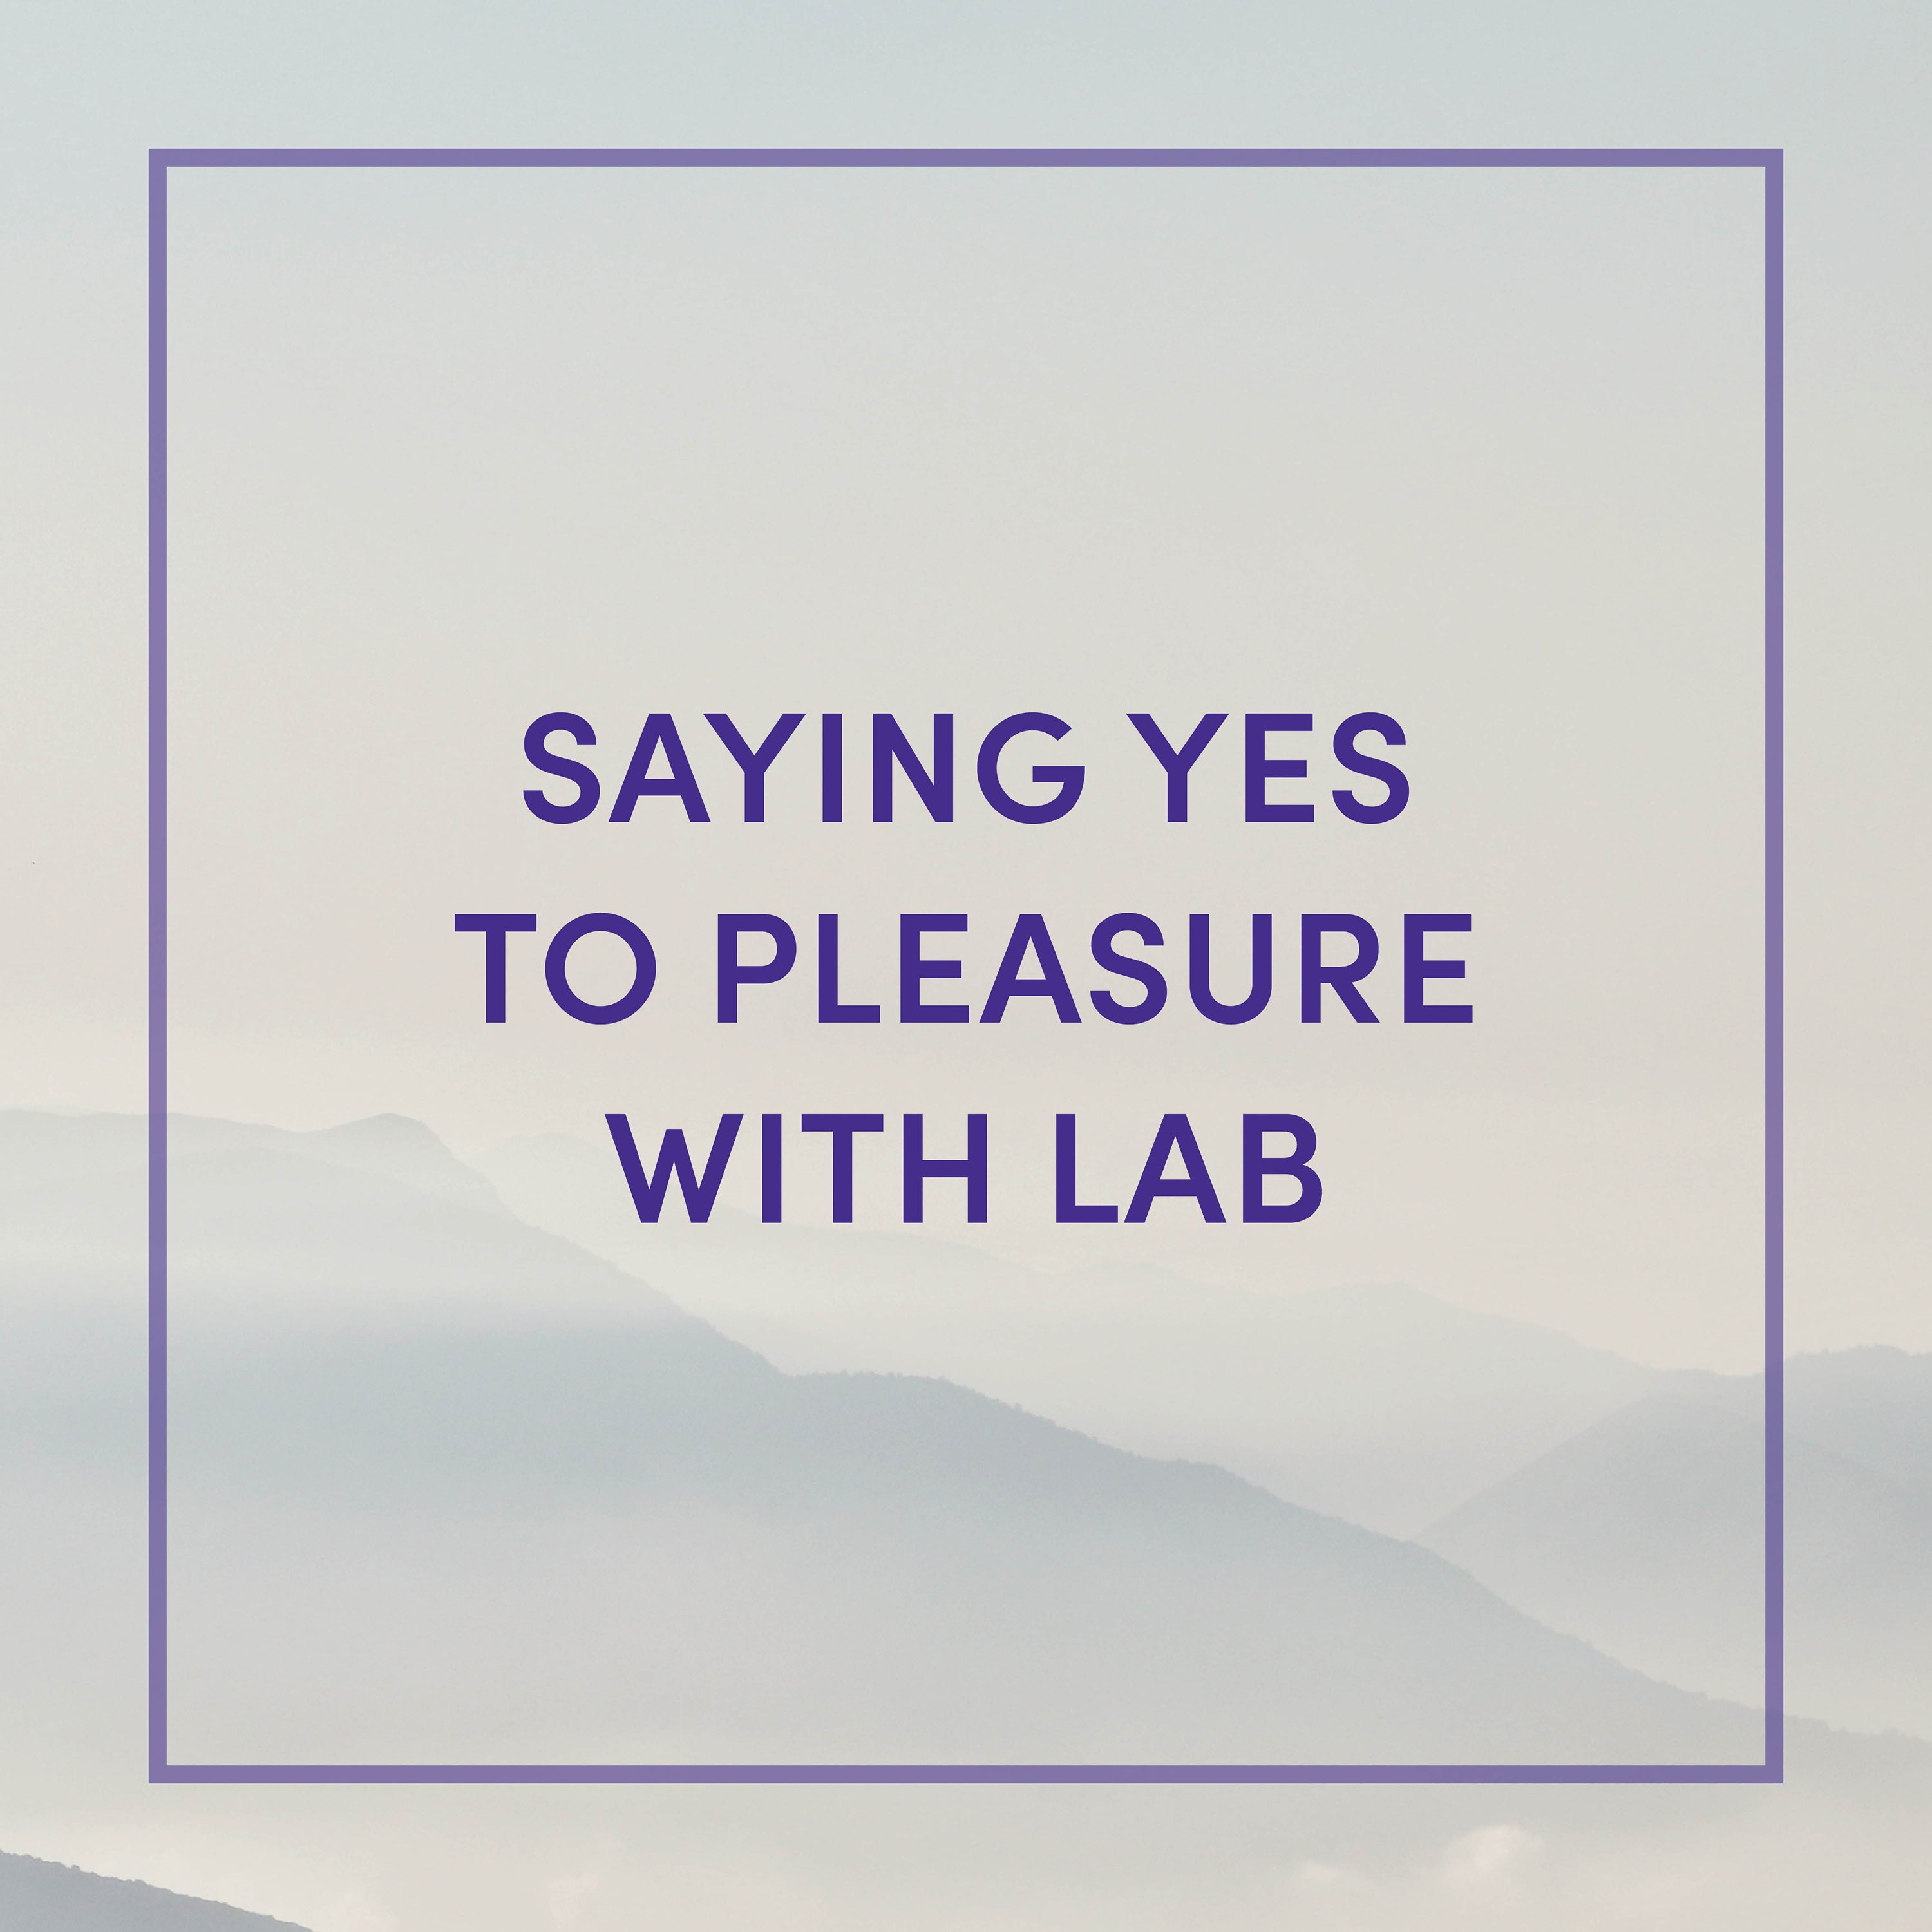 Saying Yes to Pleasure with Lab